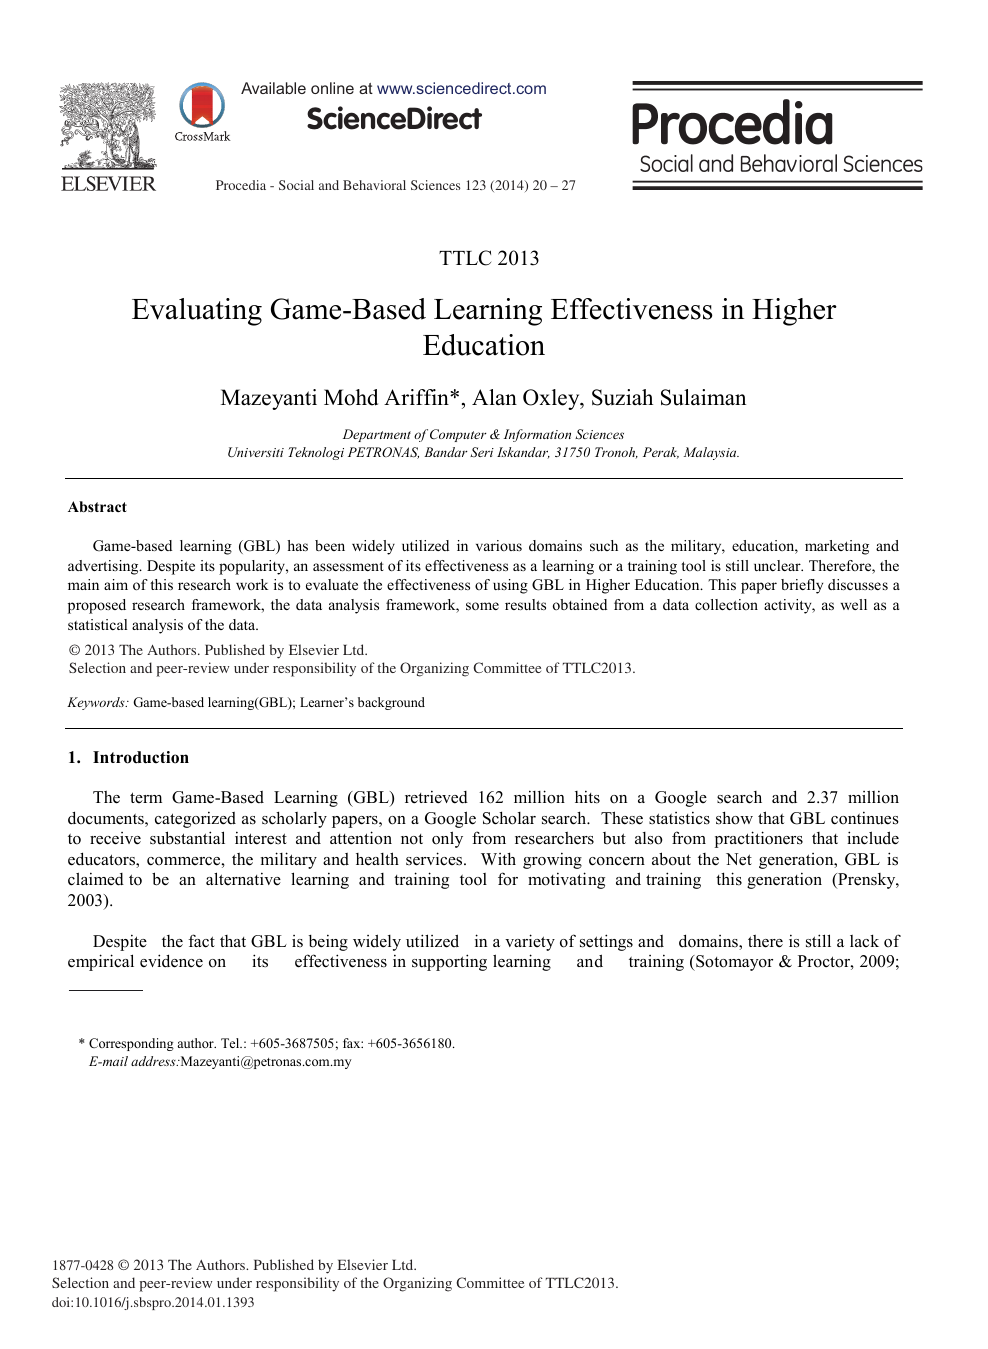 Evaluating Game Based Learning Effectiveness In Higher Education